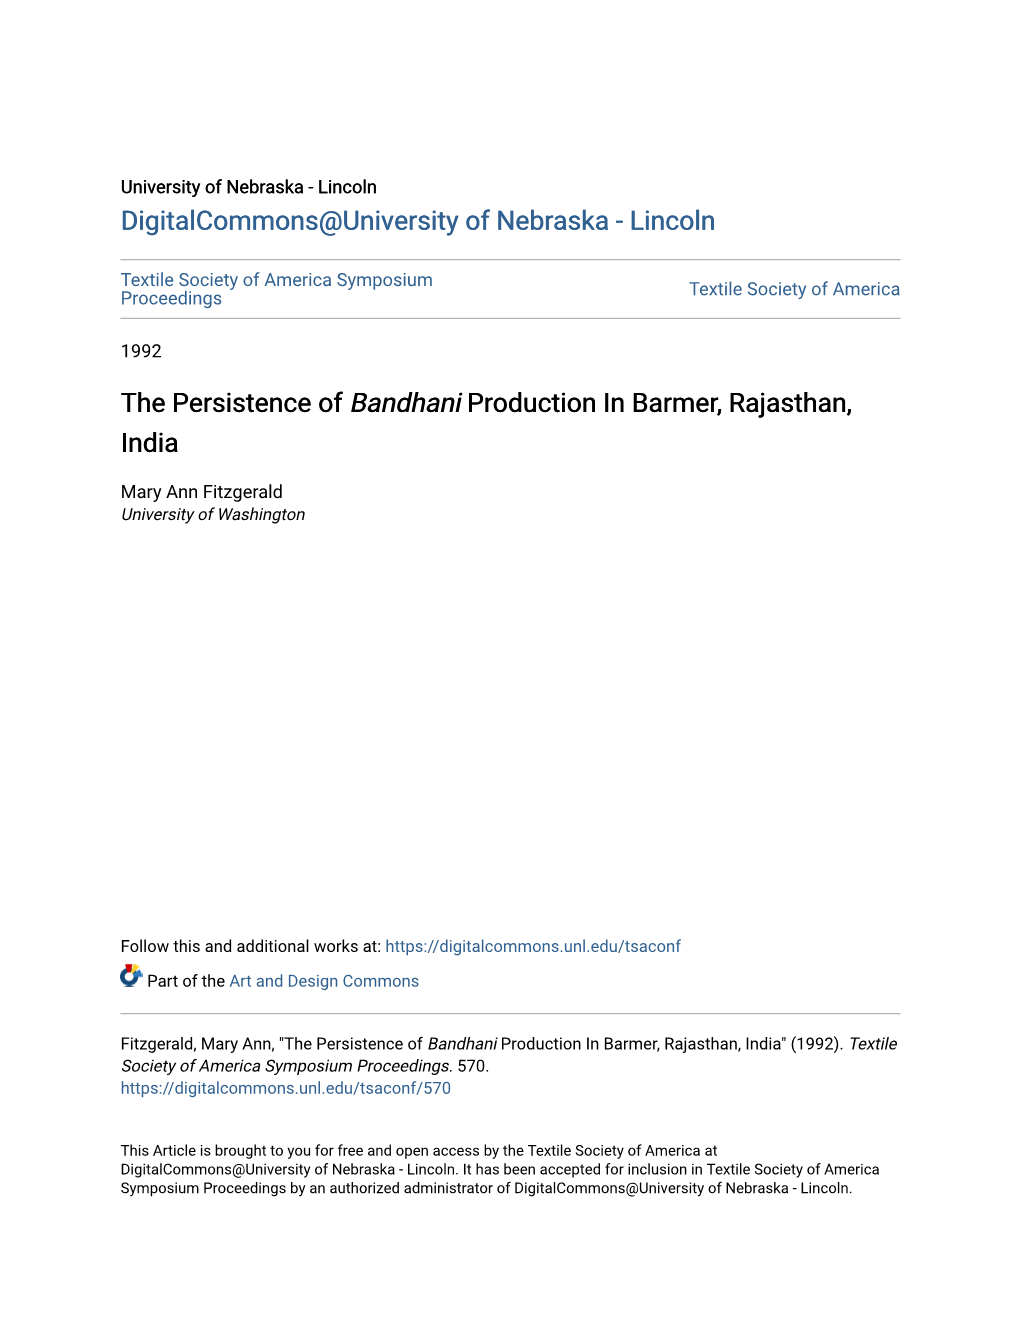 The Persistence of Bandhani Production in Barmer, Rajasthan, India